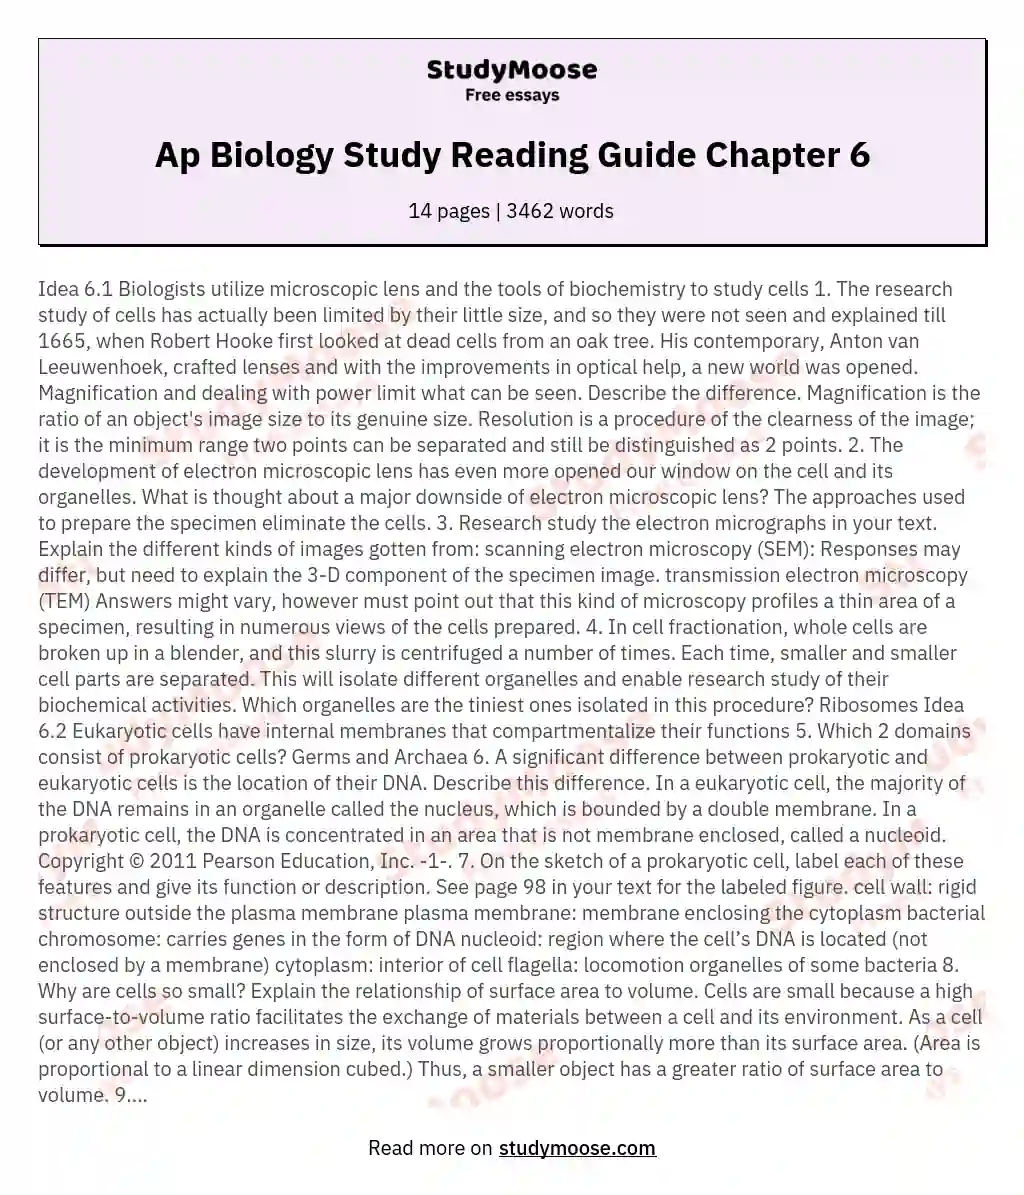 Ap Biology Study Reading Guide Chapter 6 essay